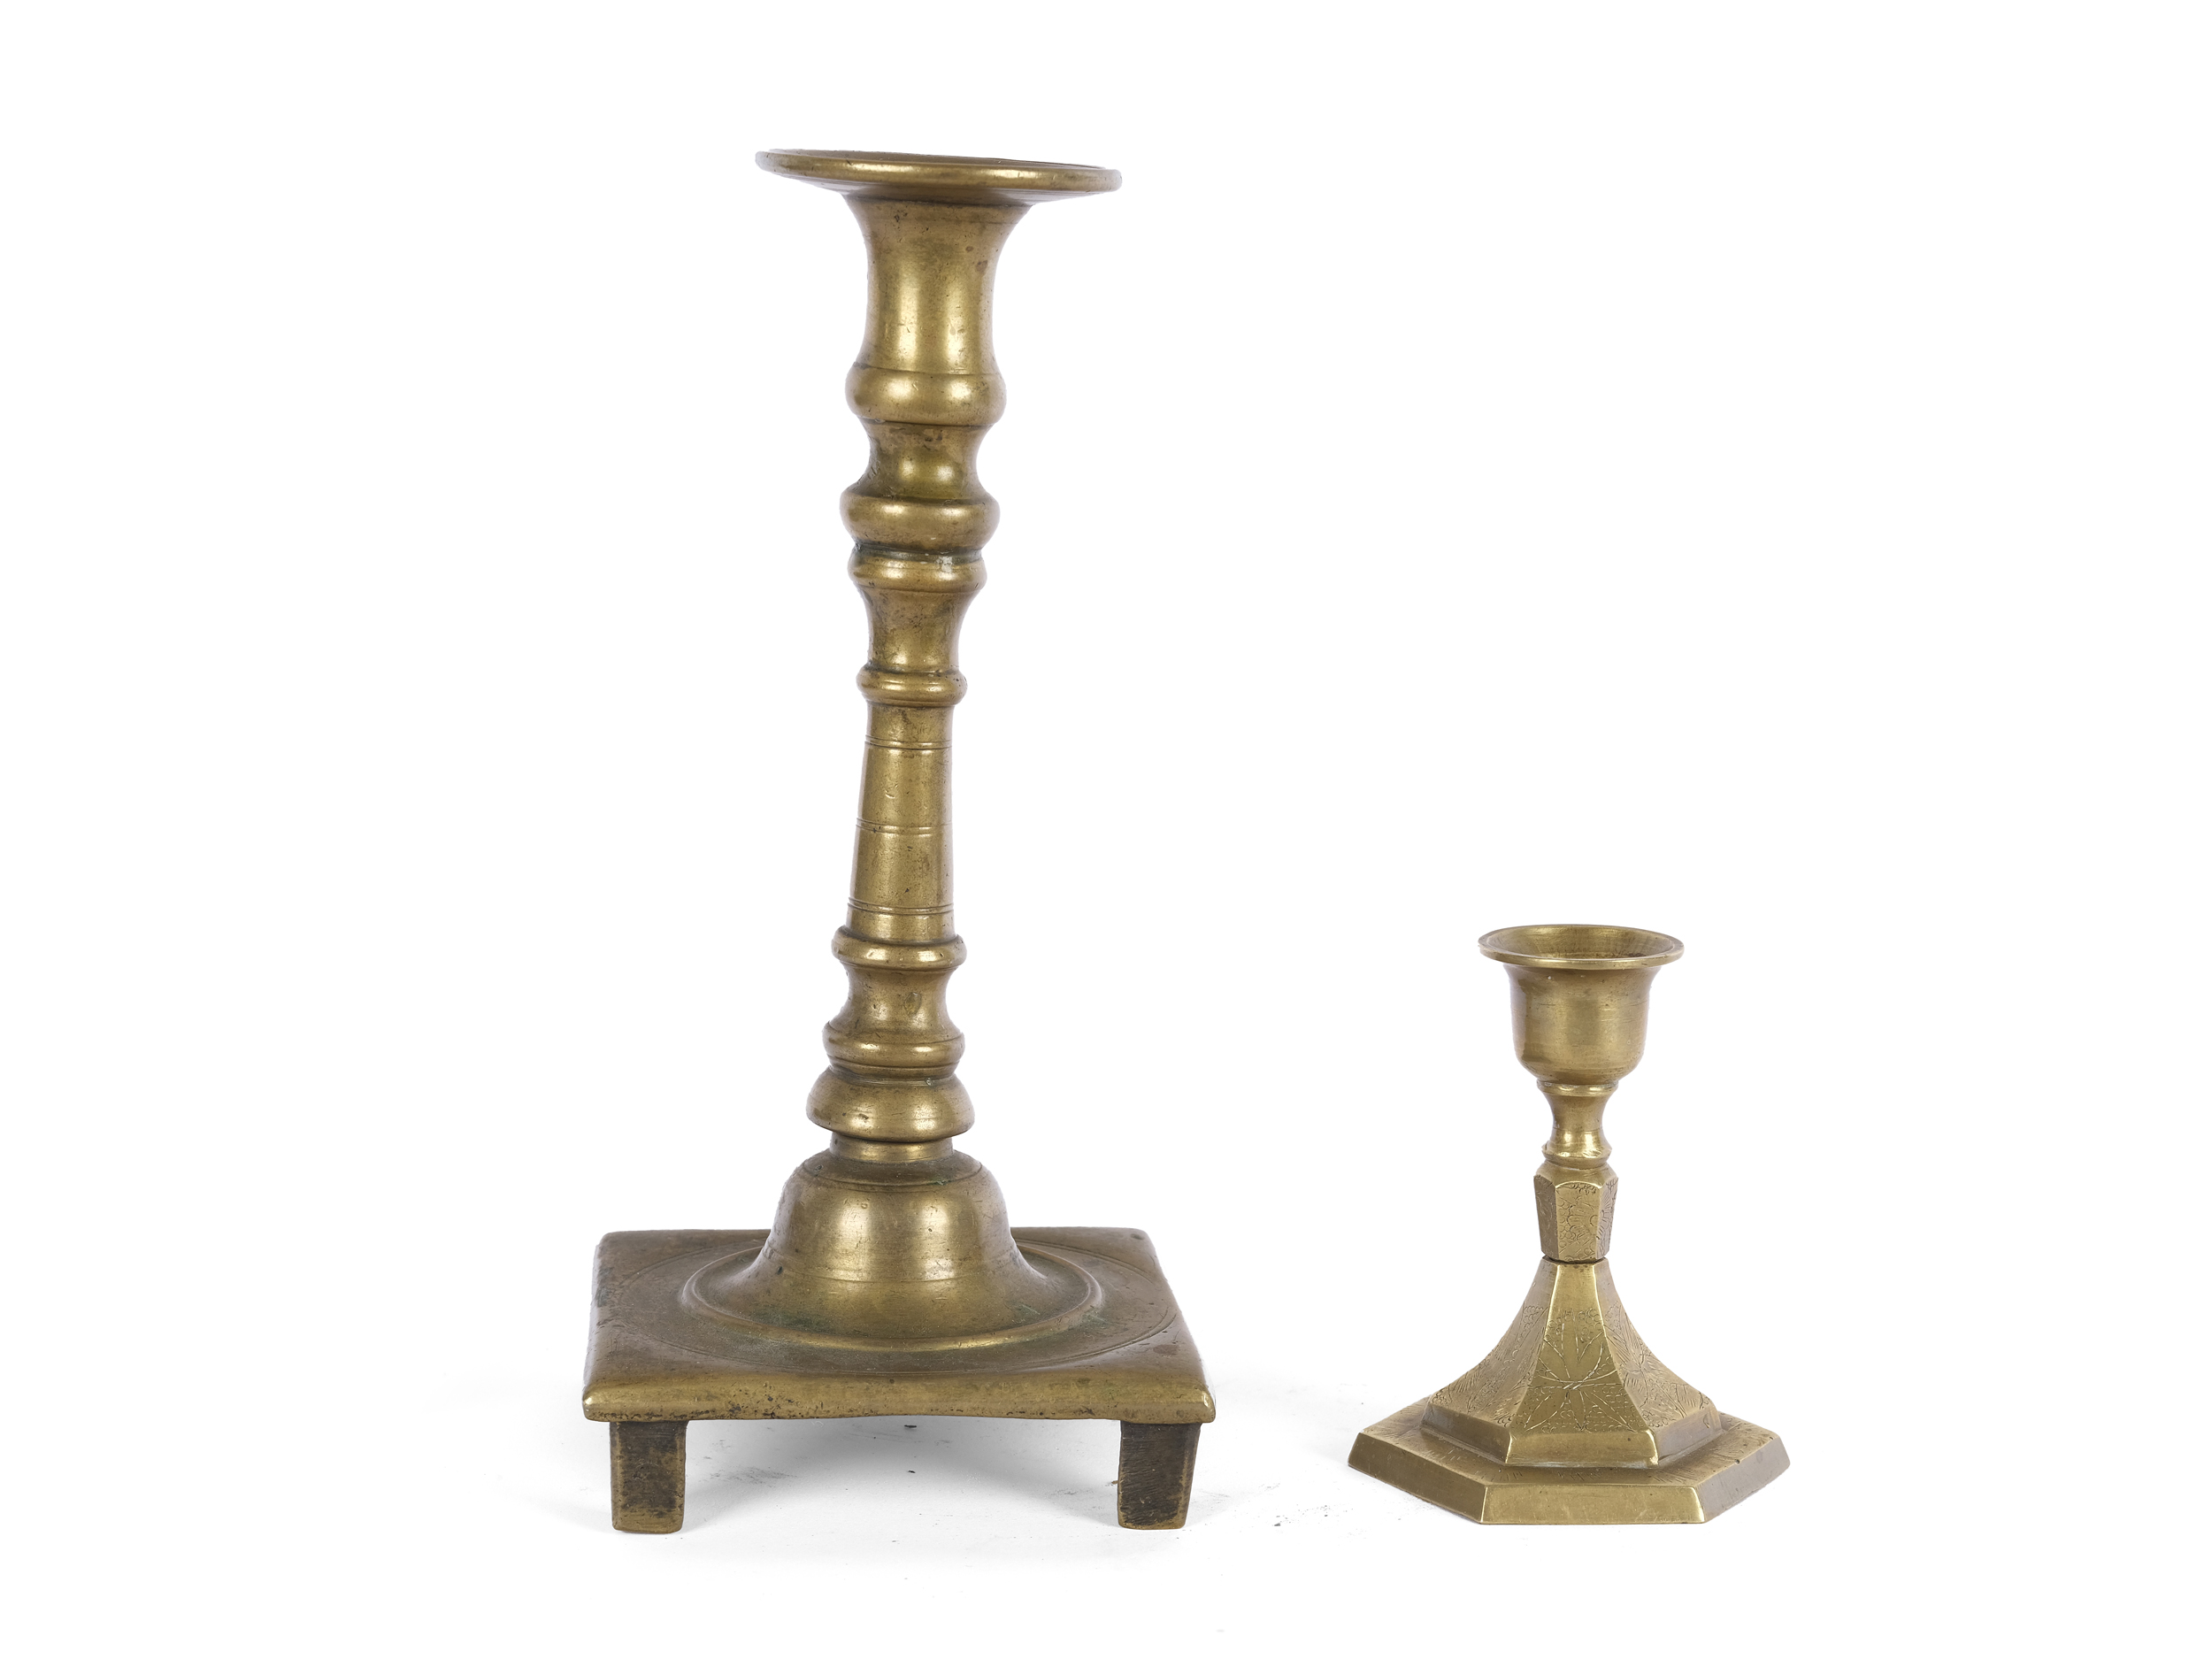 2 brass candlesticks, Baroque, 17th/18th century - Image 2 of 3